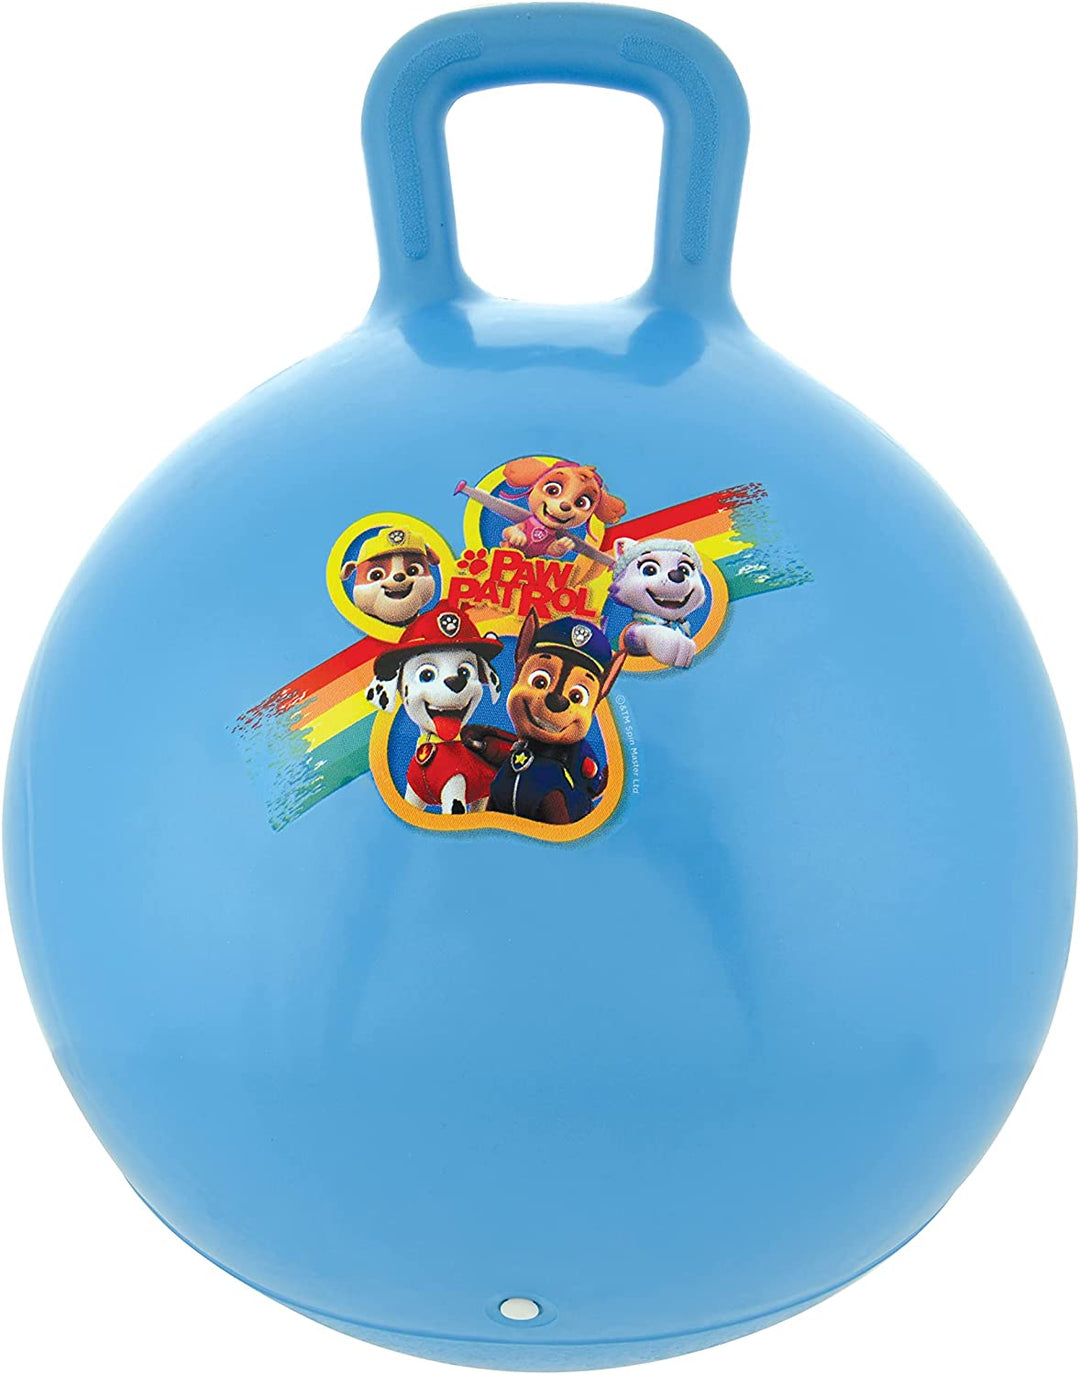 Paw Patrol Inflatable Hopper Bouncer